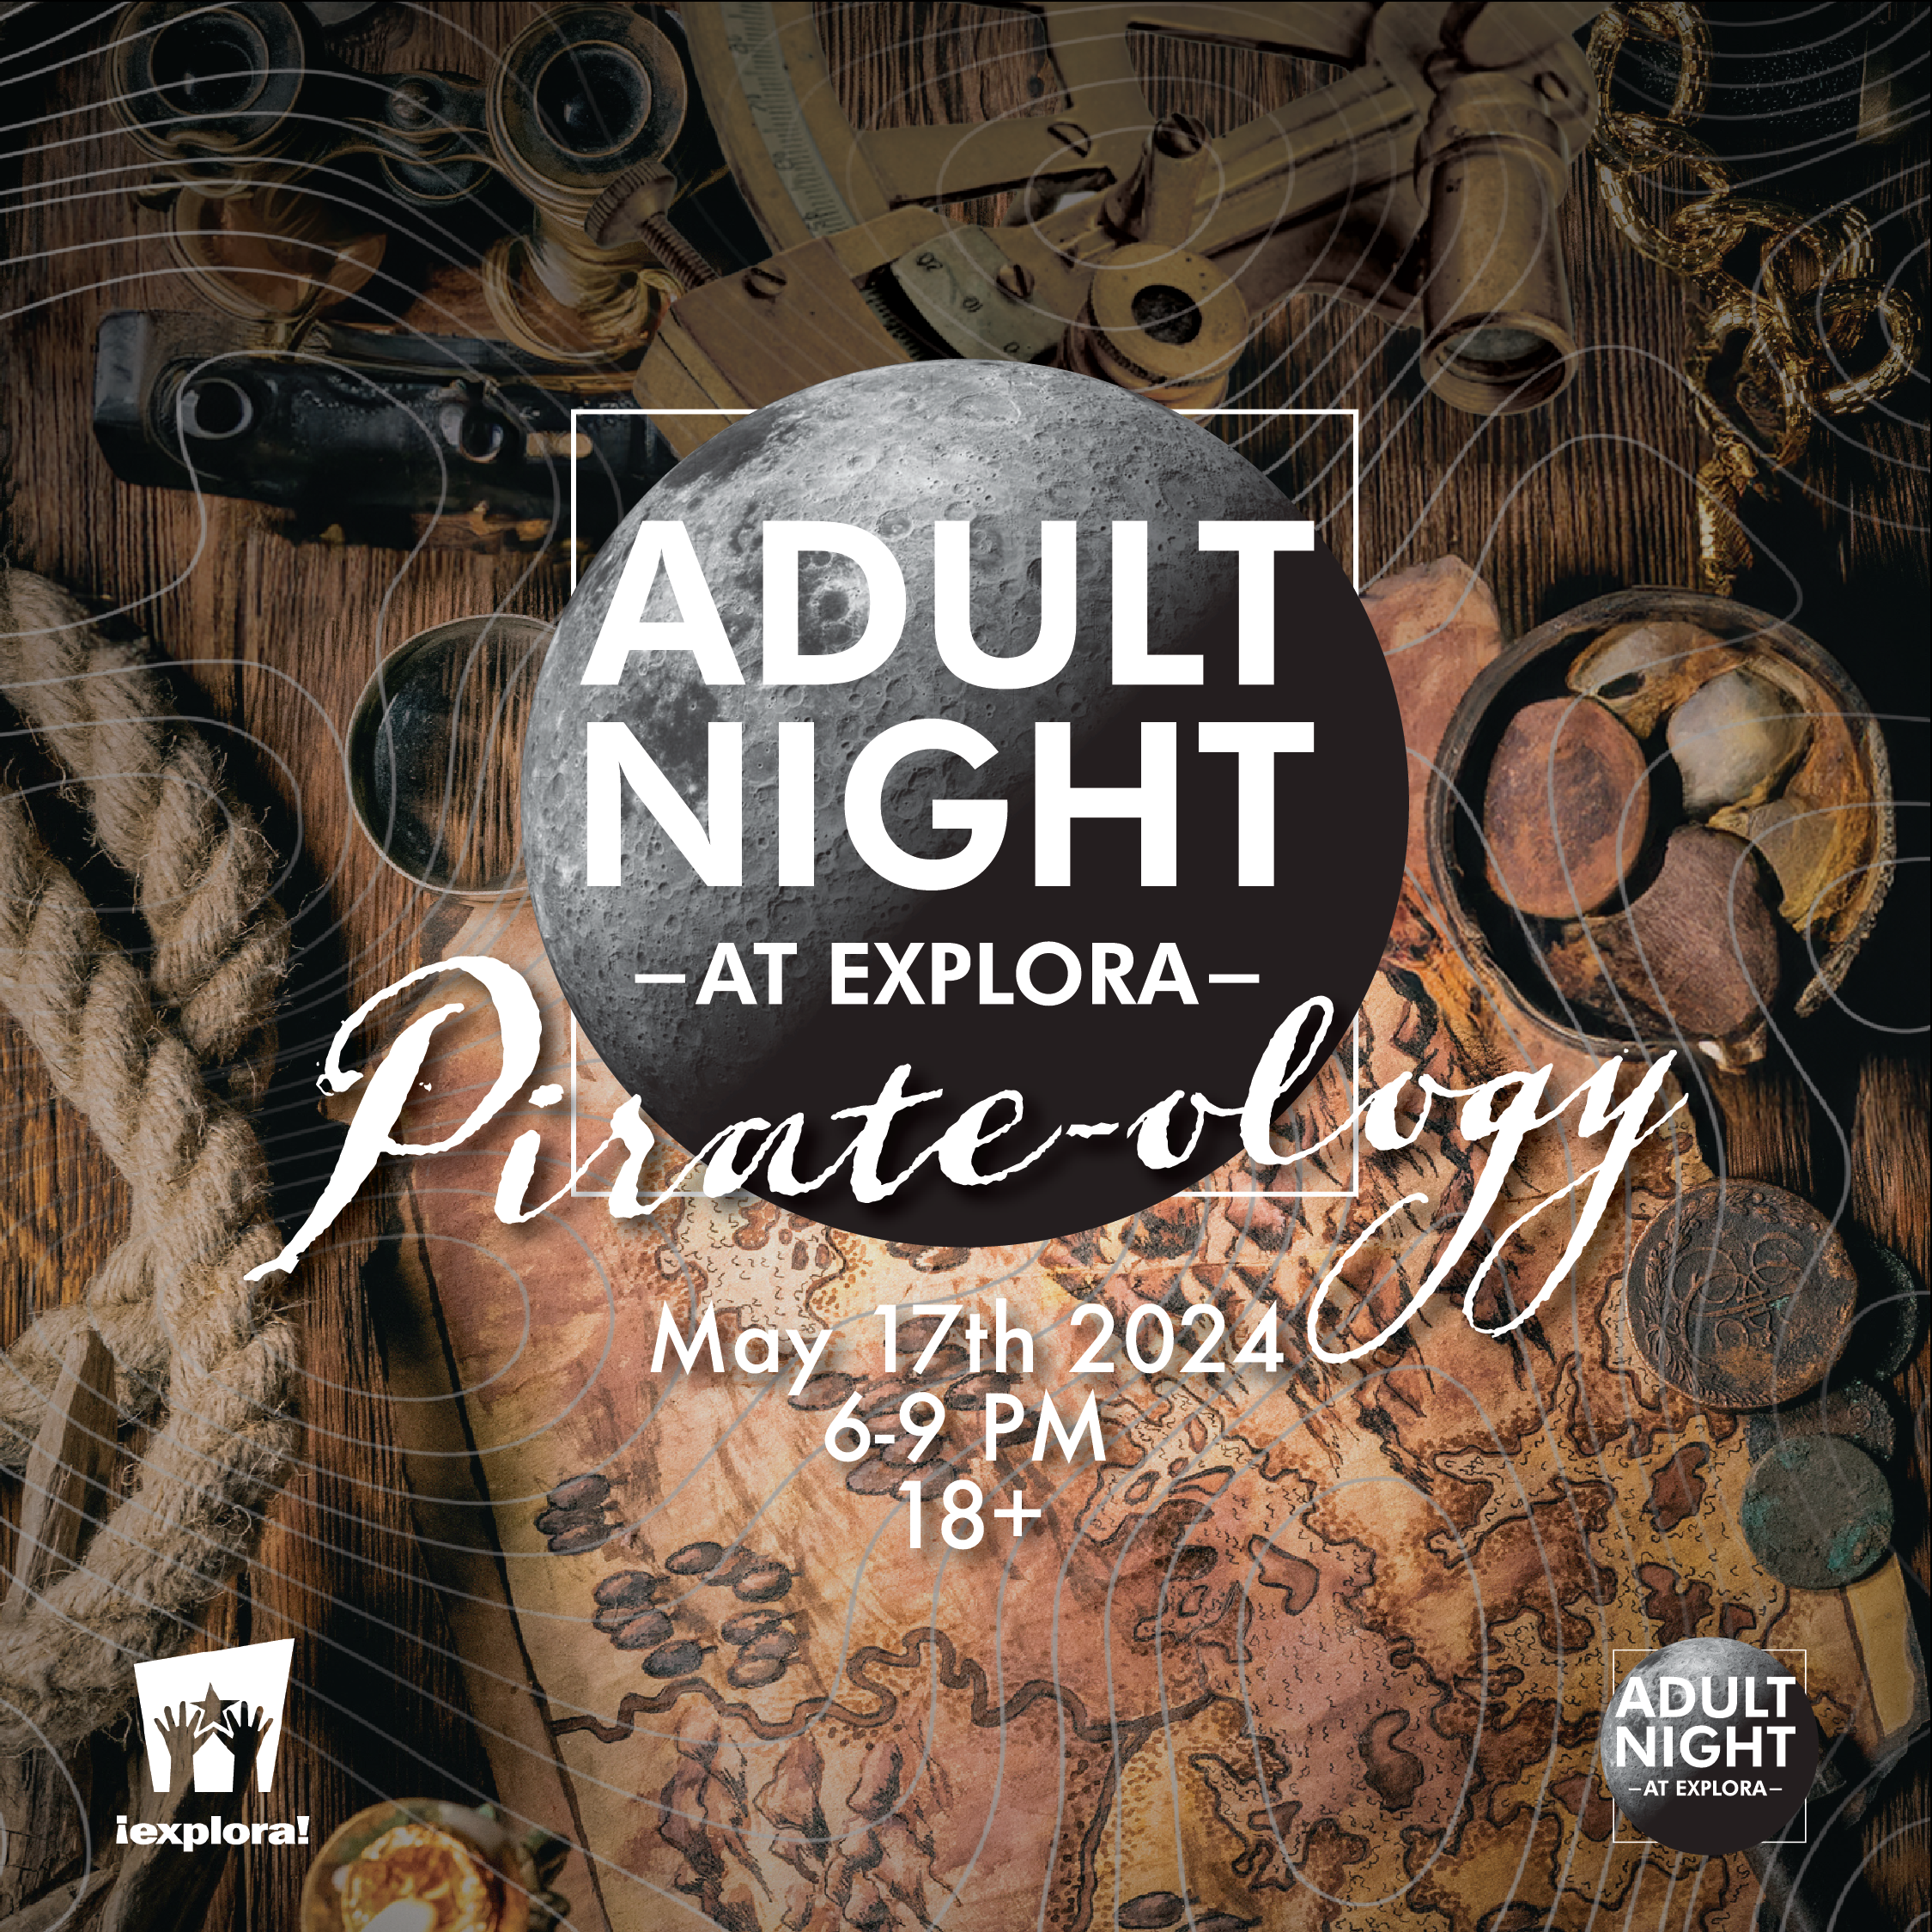 Flyer for Adult Night Pirate-ology on May 17 at Explora. Explora's Adult Night Moon logo over a pirate map